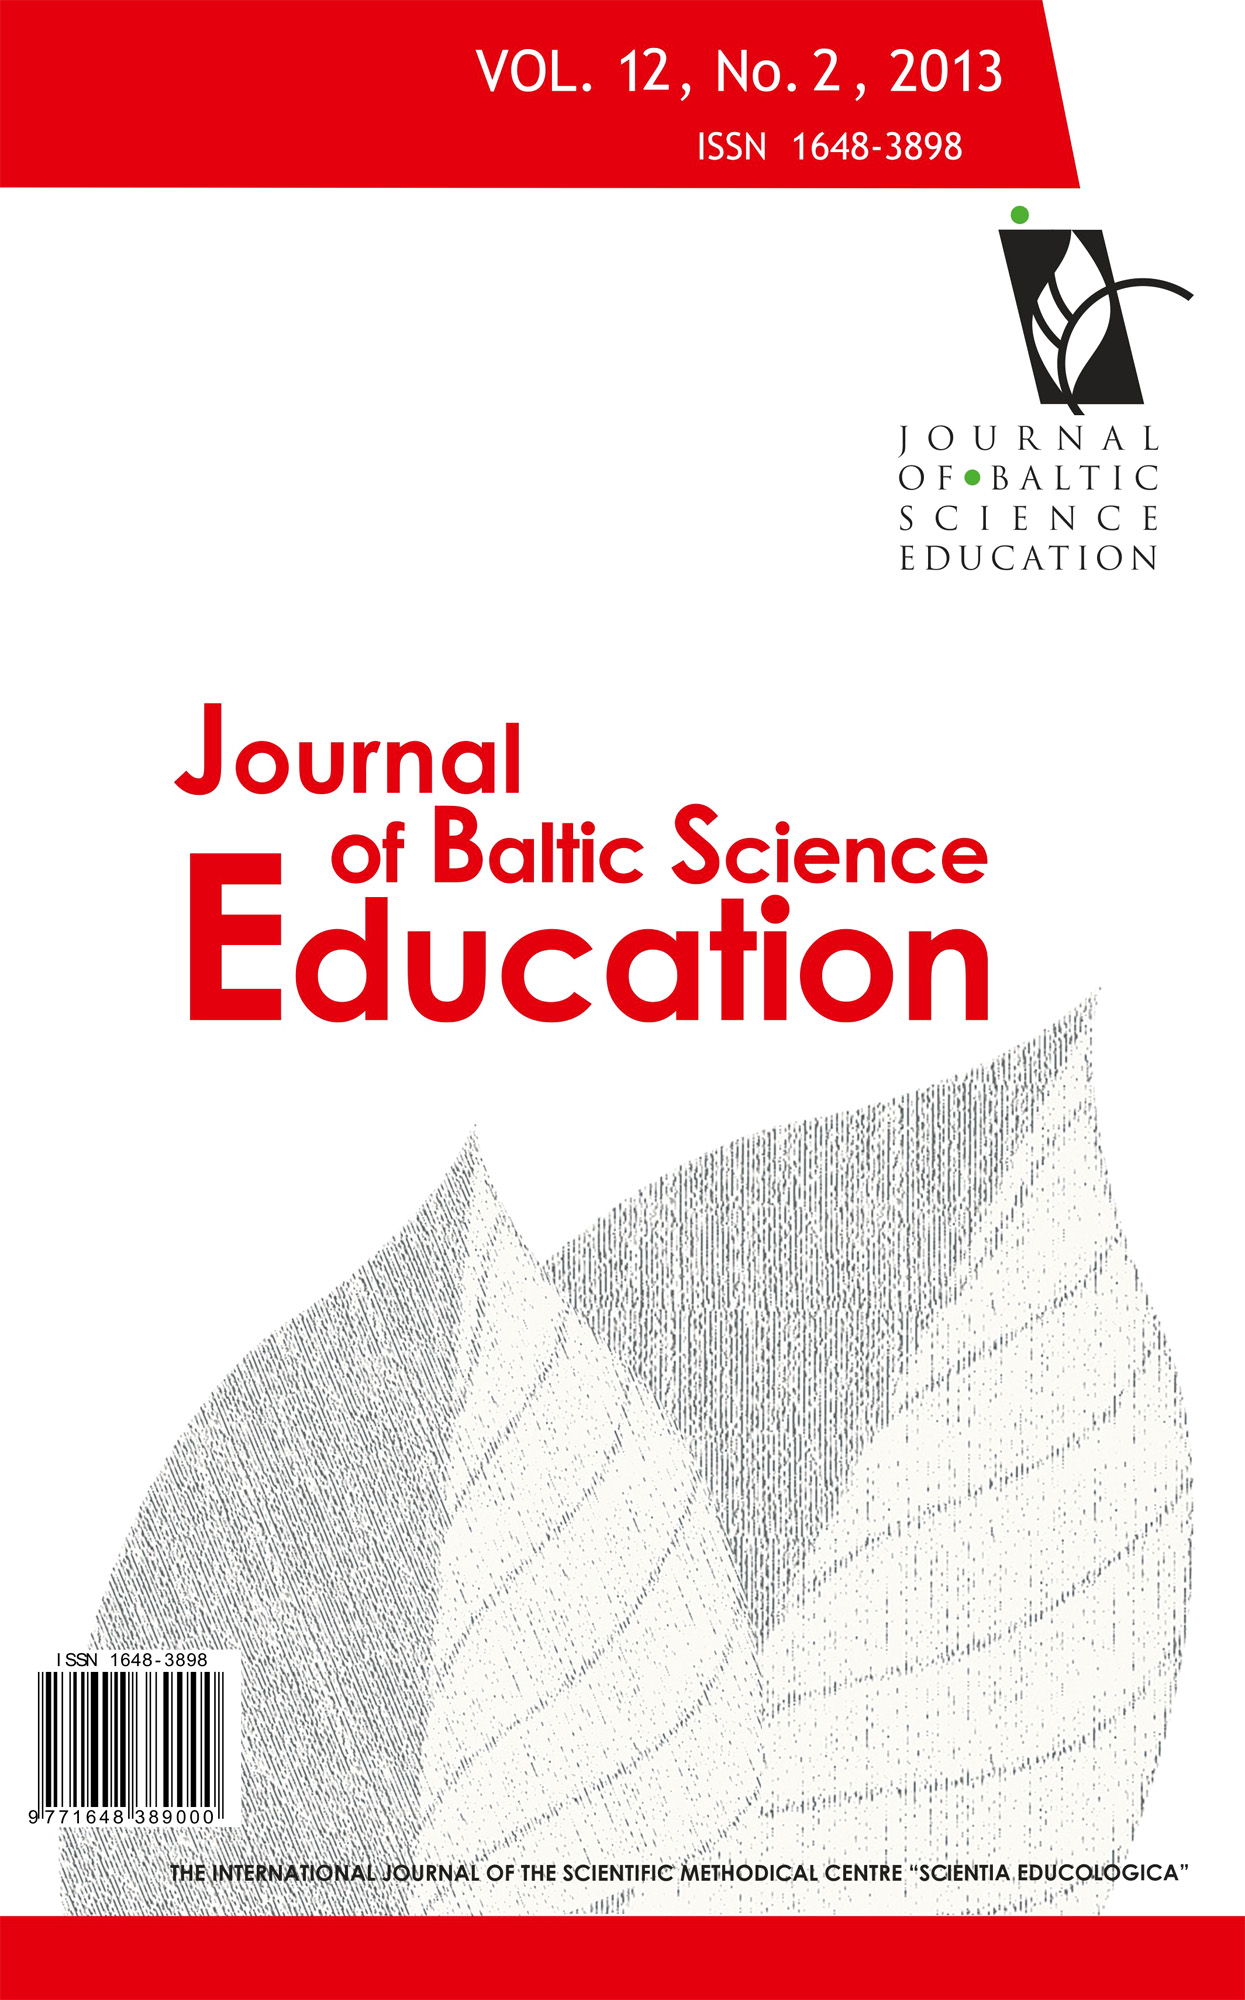 USEFULNESS OF OUT-OF-SCHOOL LEARNING IN SCIENCE EDUCATION